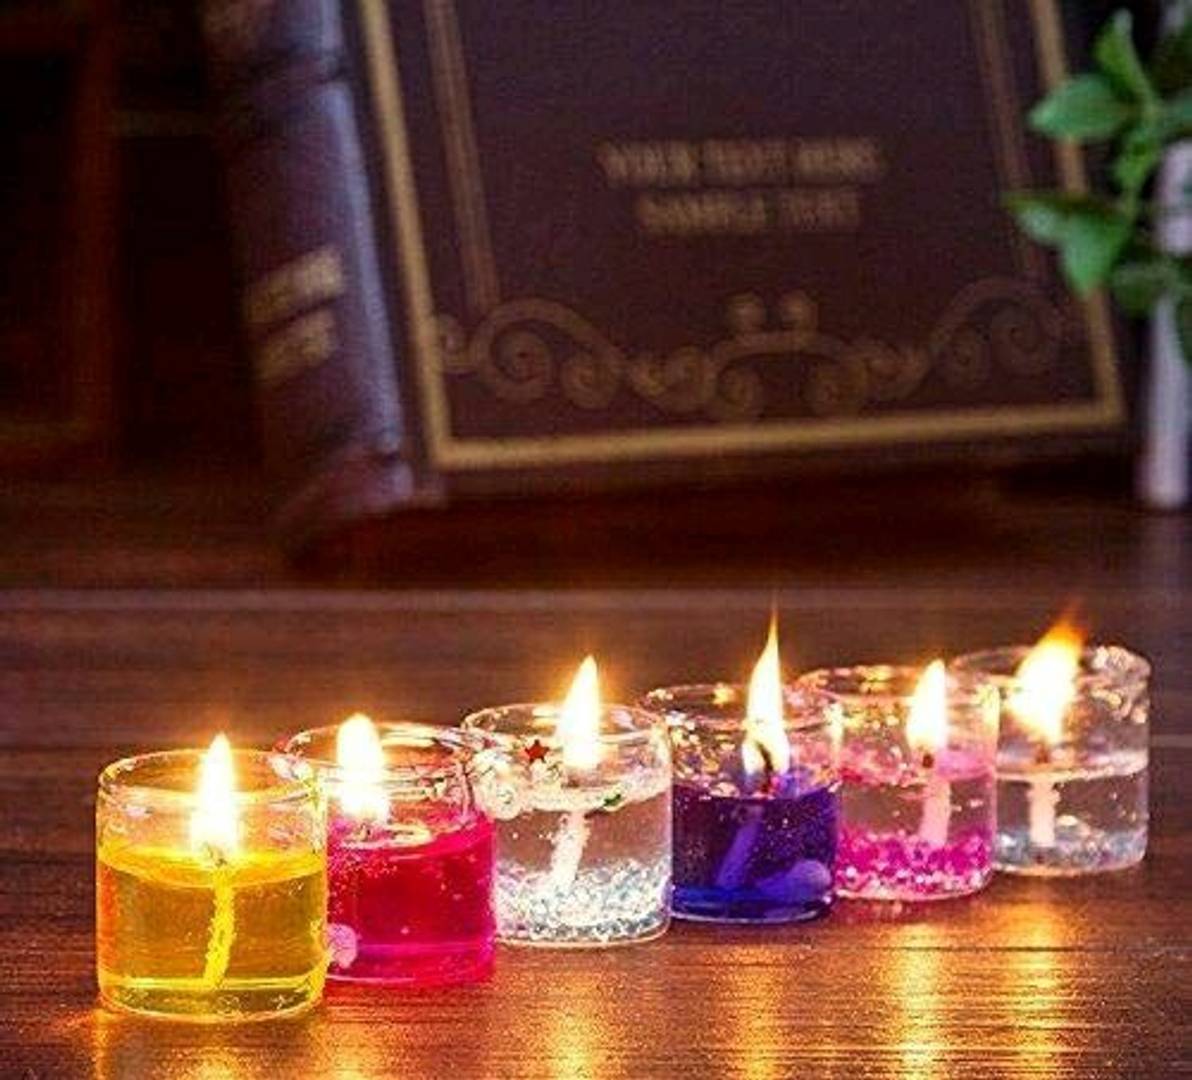 Decorative Gel "Mini" Wax Candles for Home Decoration - Pack of 6